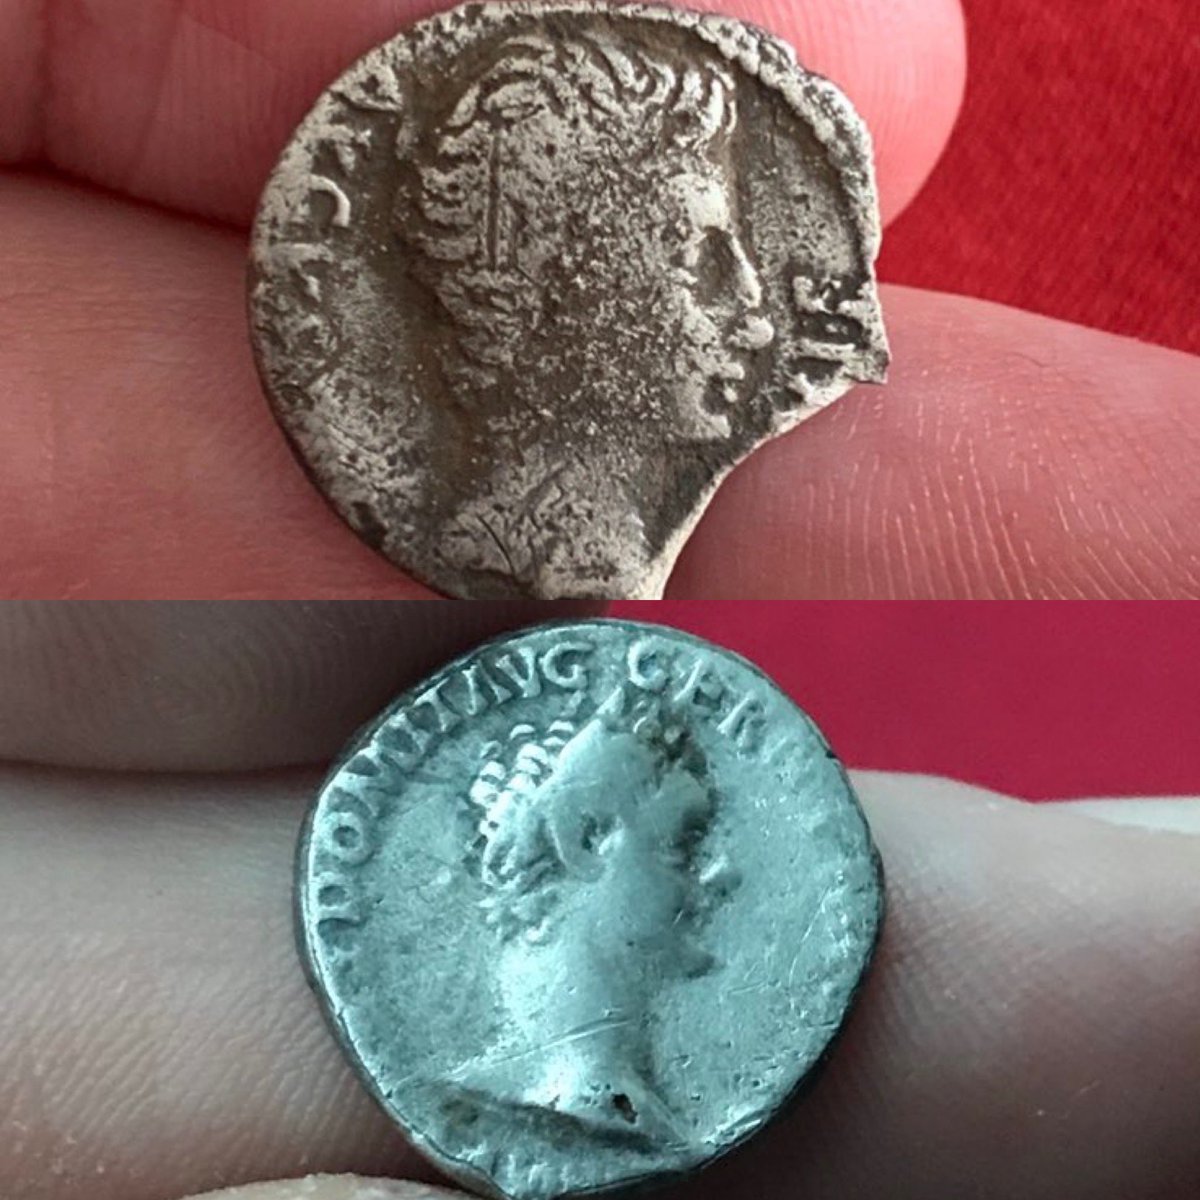 ..finally we have a denarius from the reign of the Roman Emperor Augustus, this one was minted in Rome in 15 bc-13 bc & is pictured above. The bottom picture is of a denarius of the Roman Emperor Domitian & this one was most likely minted in 88/89 ad...